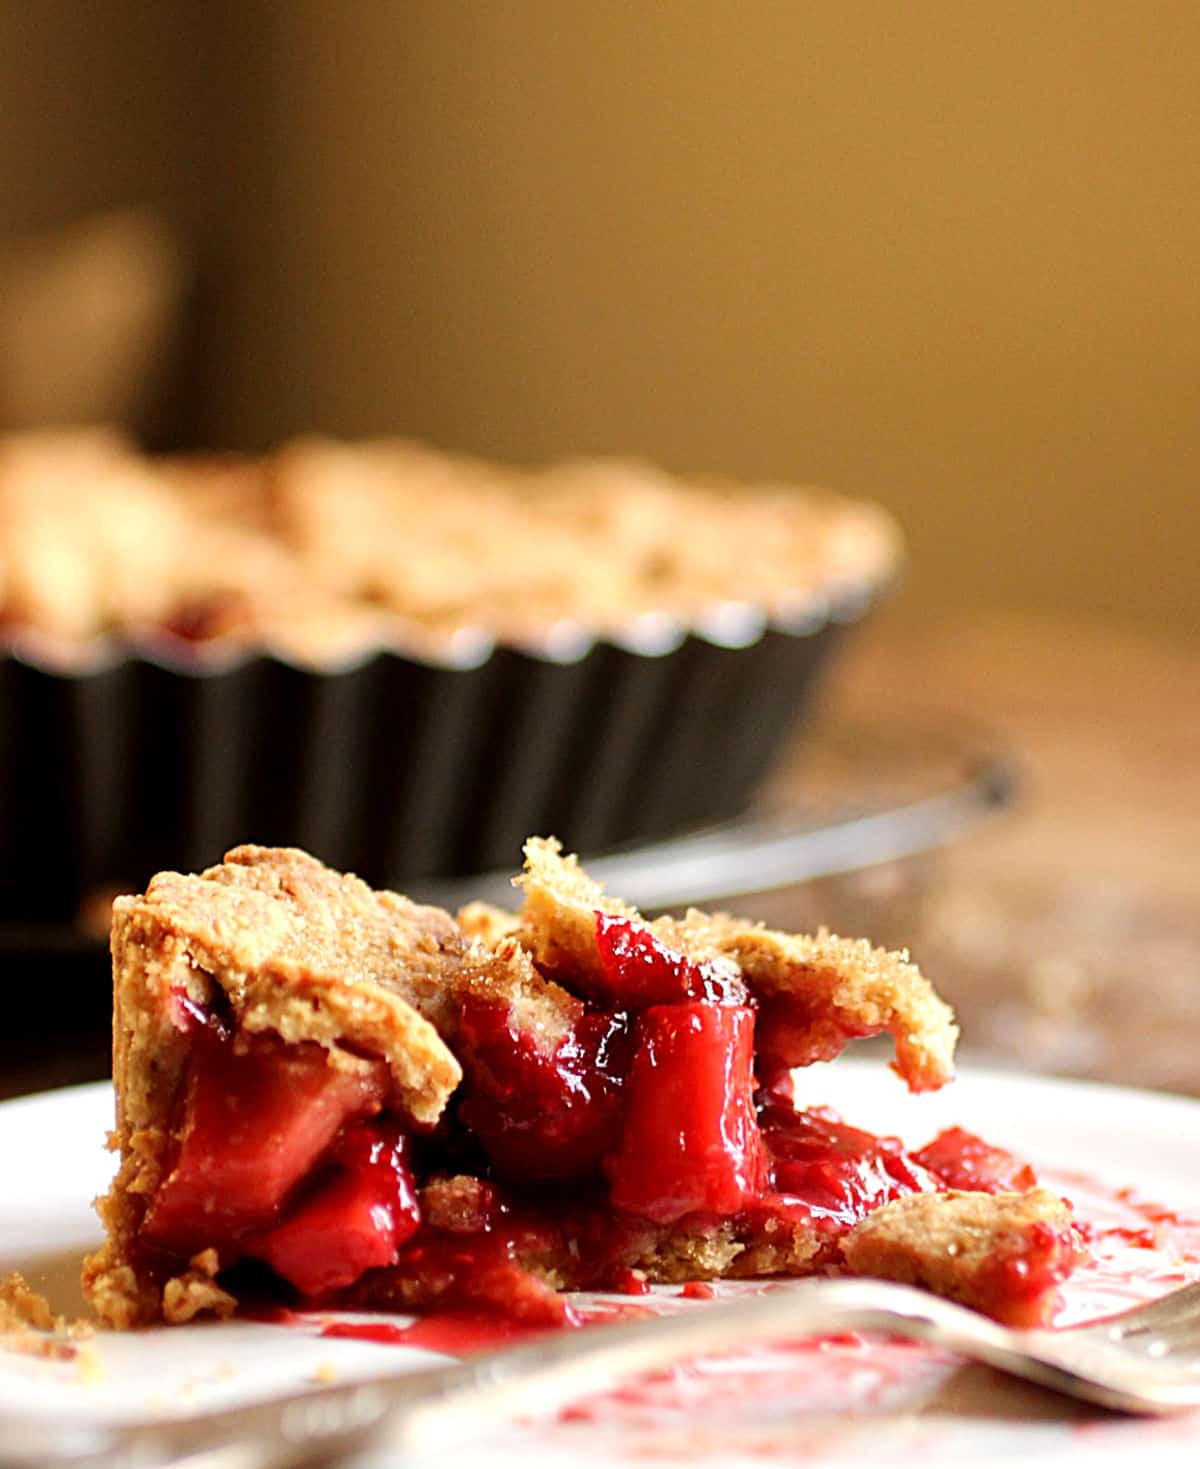 Slice of apple raspberry pie on white plate, pie pan and wooden table on the background.